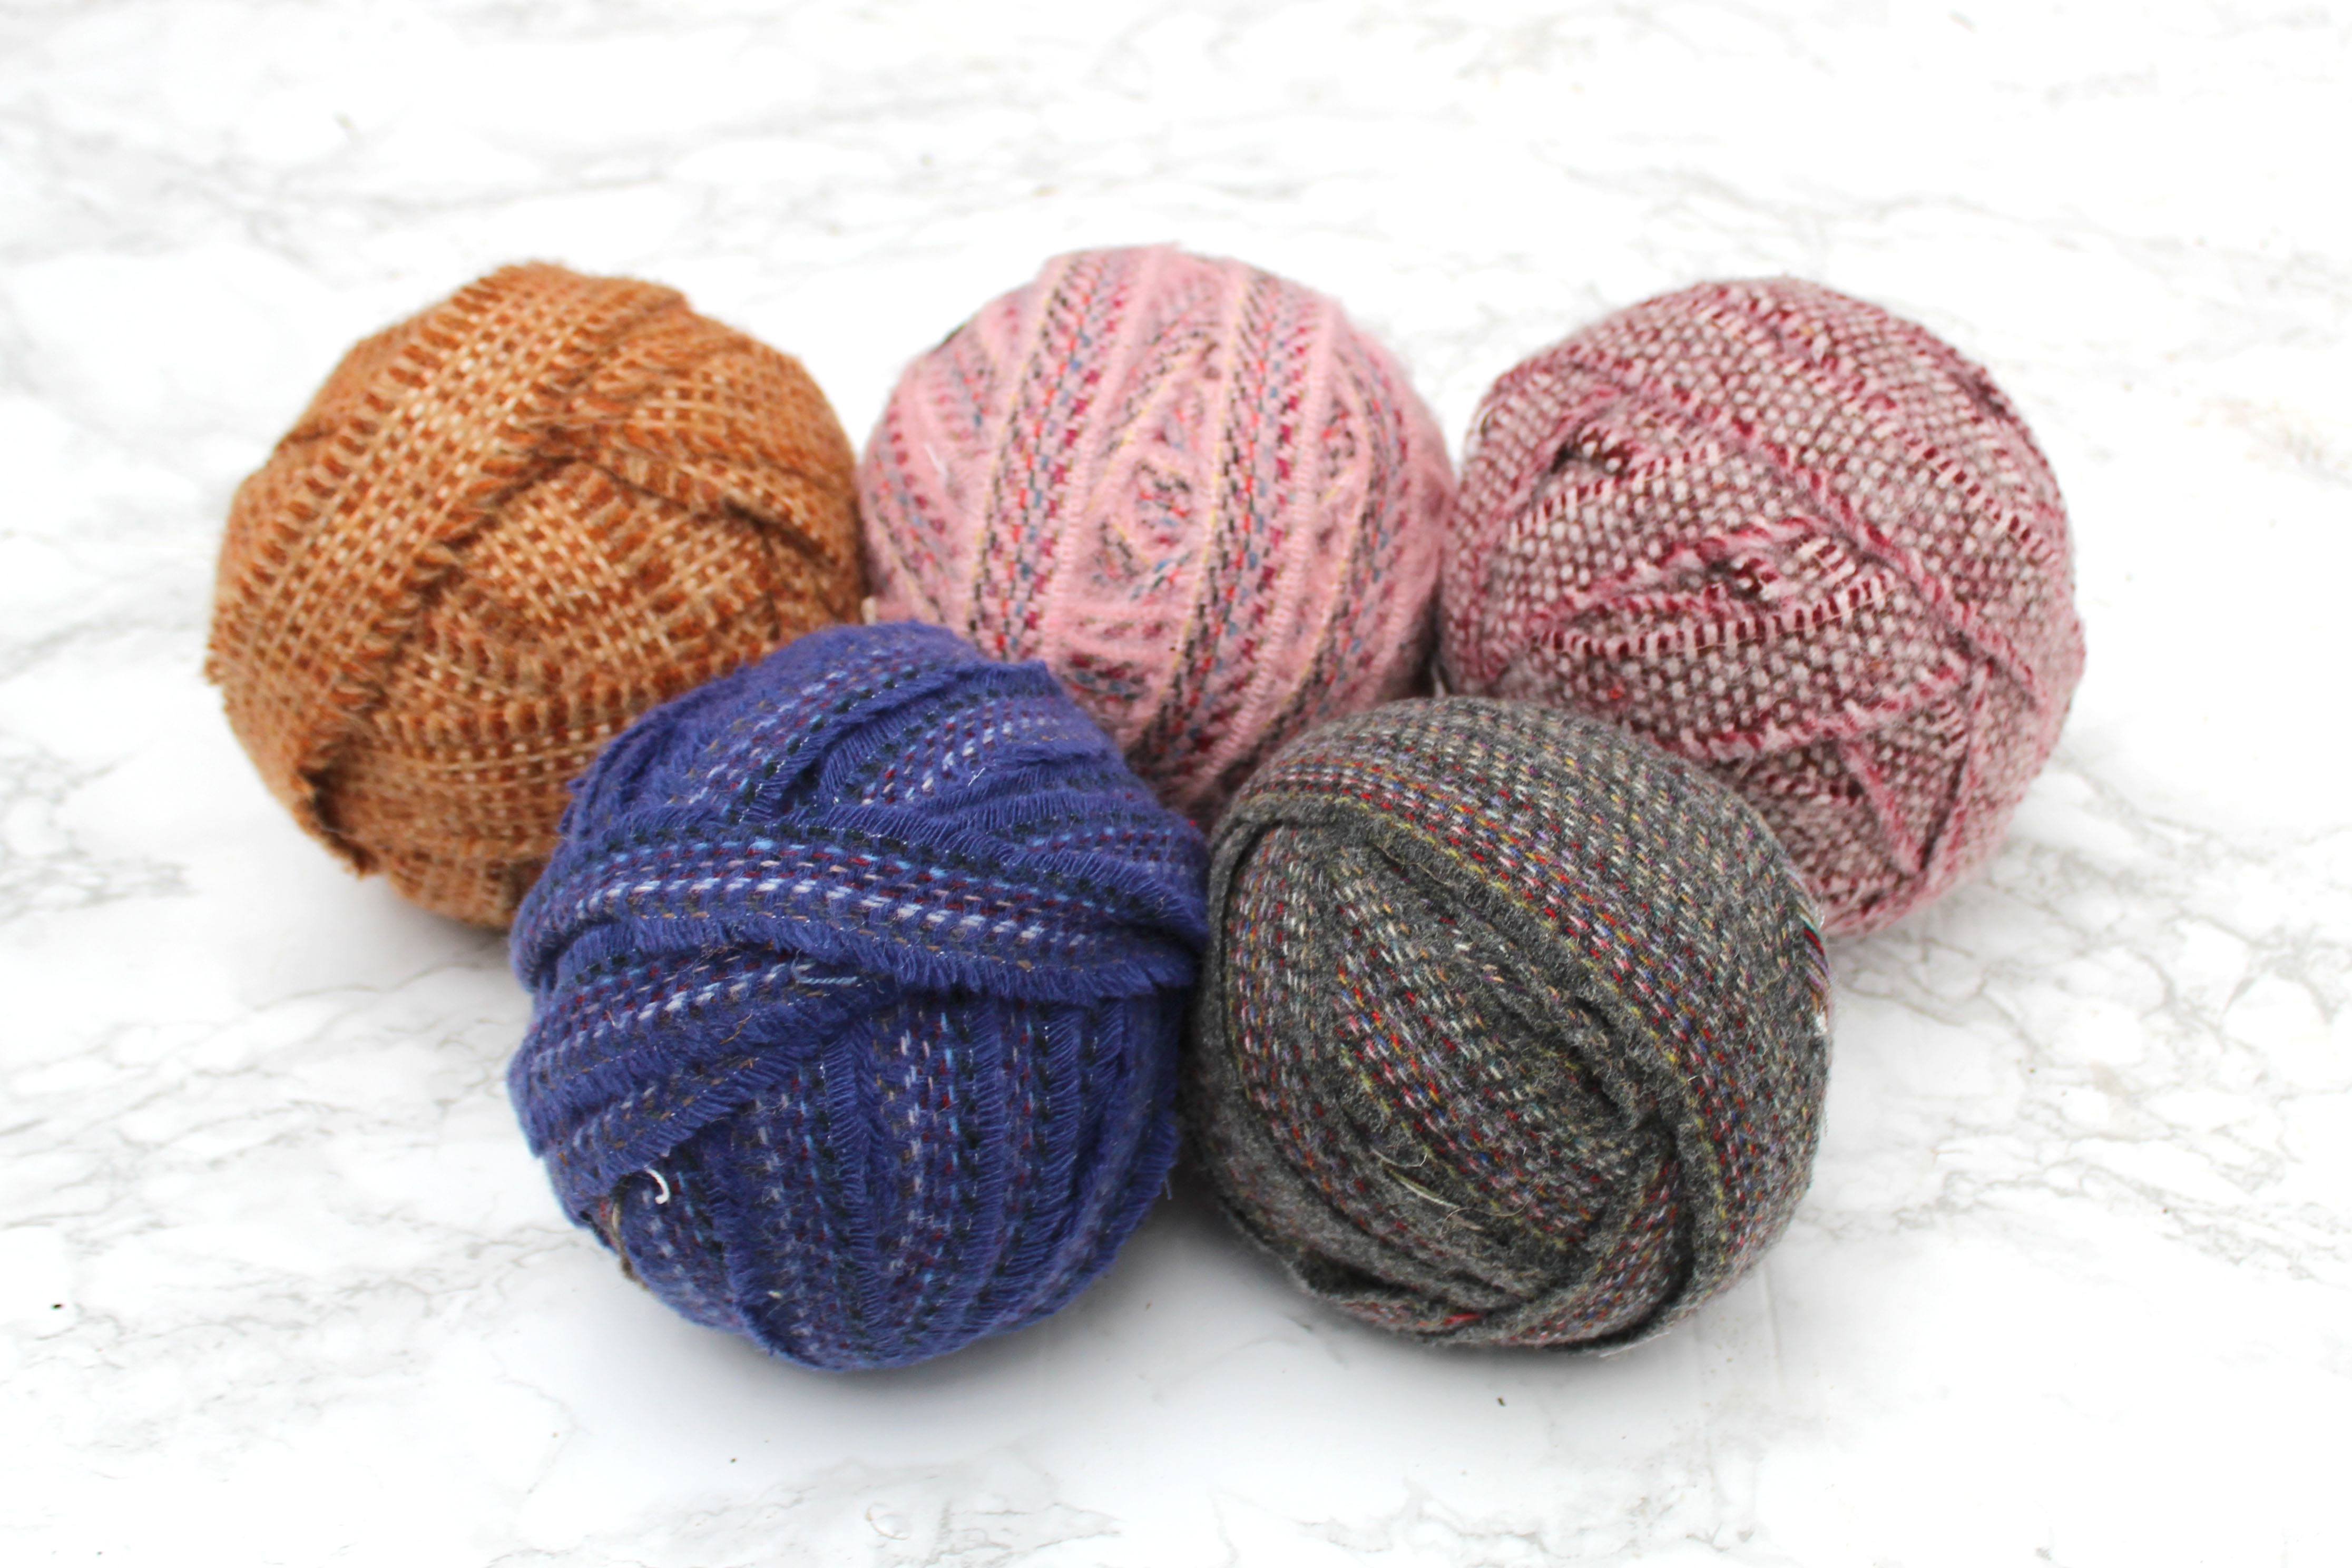 Woven Blanket Yarn Five Balls Stitched Pattern Mixed Colours